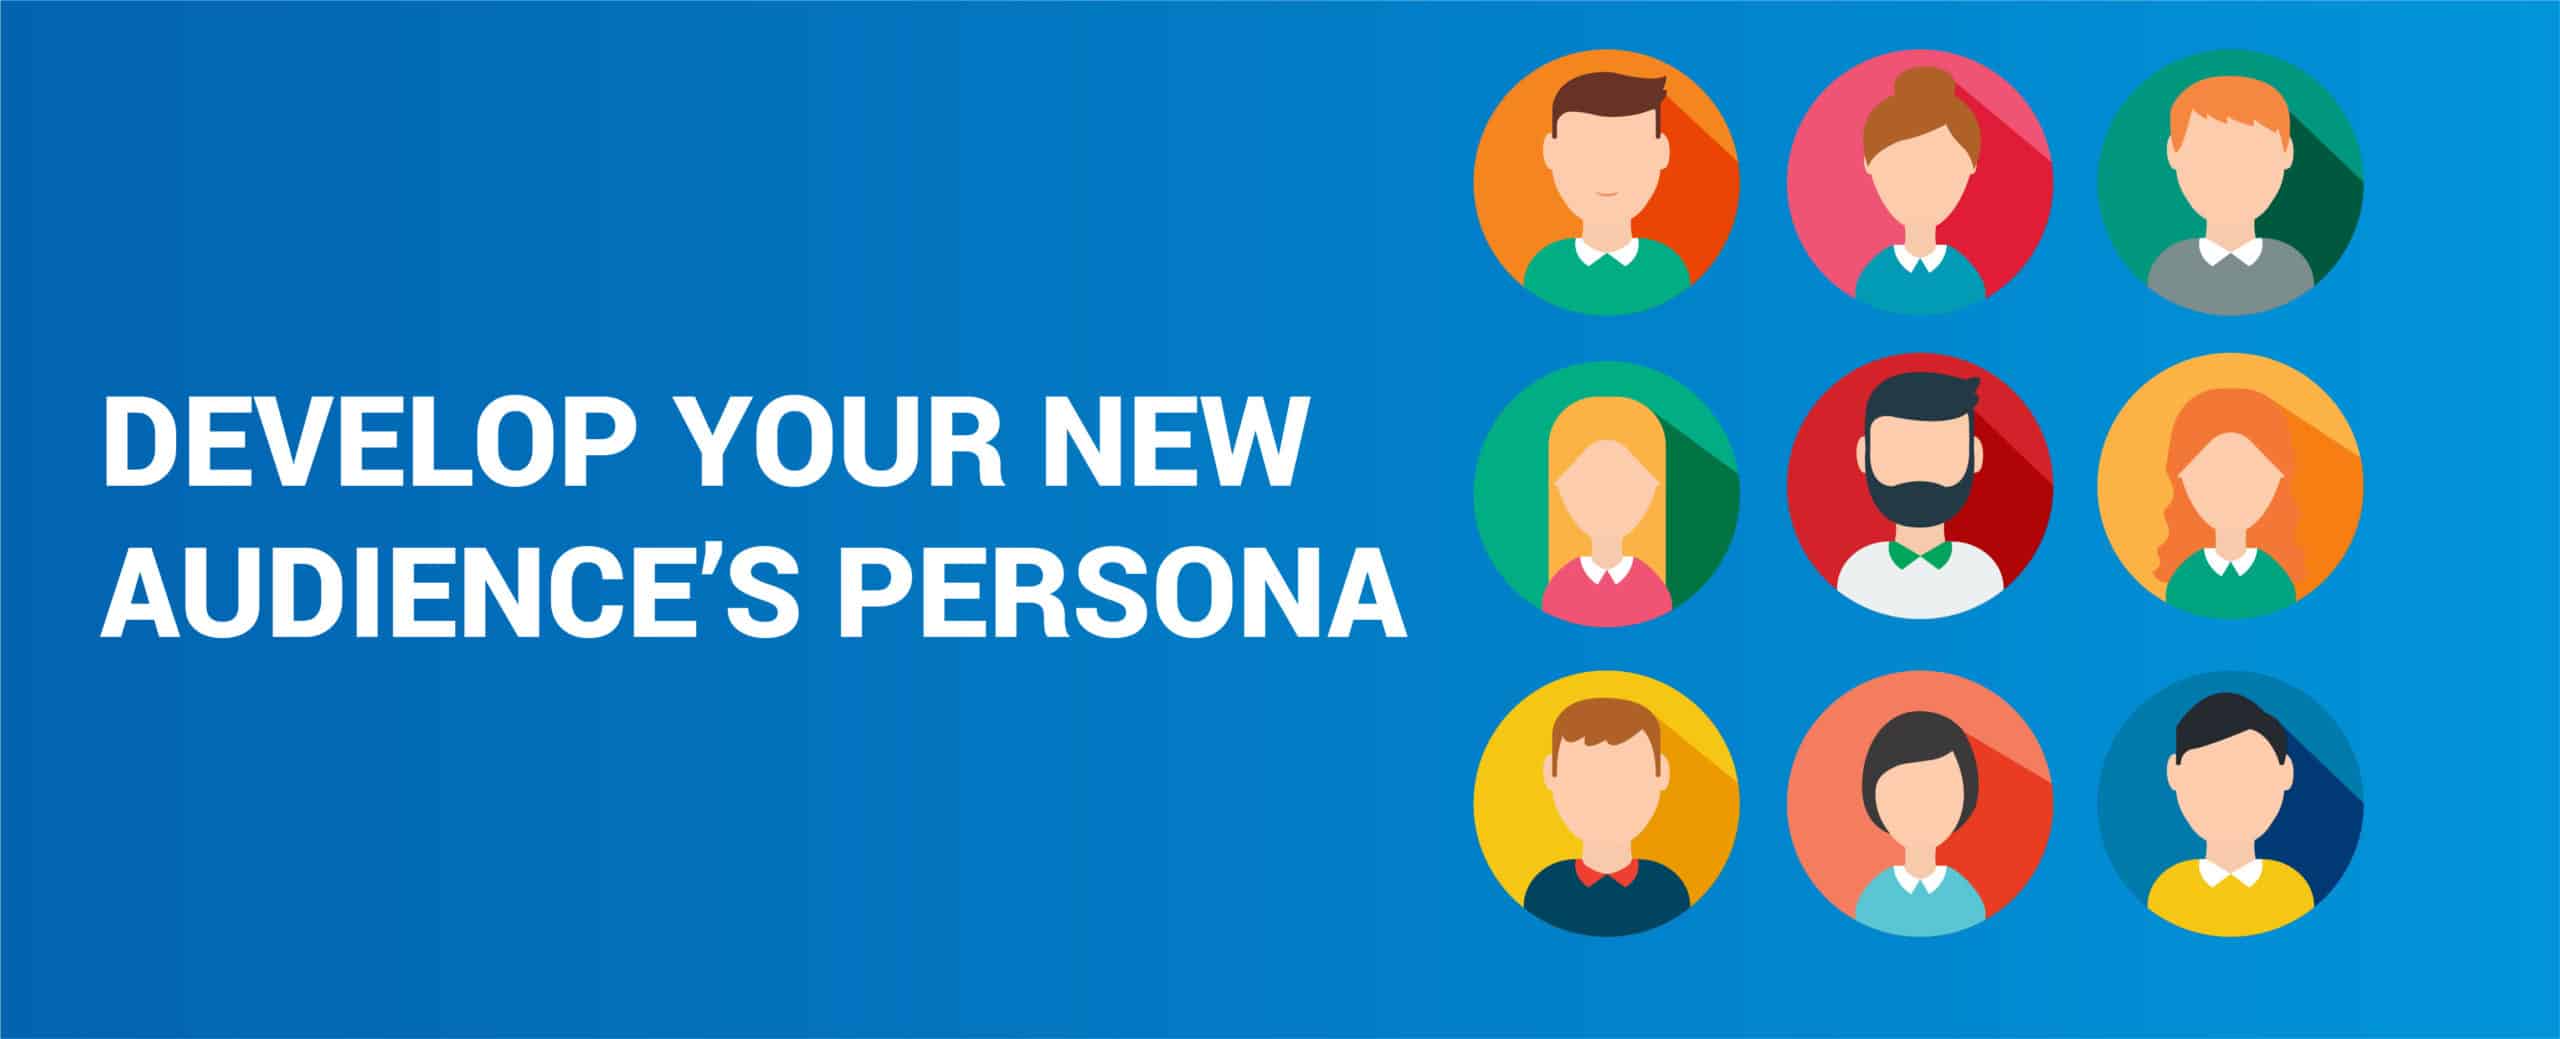 Develop Your New Audience’s Persona